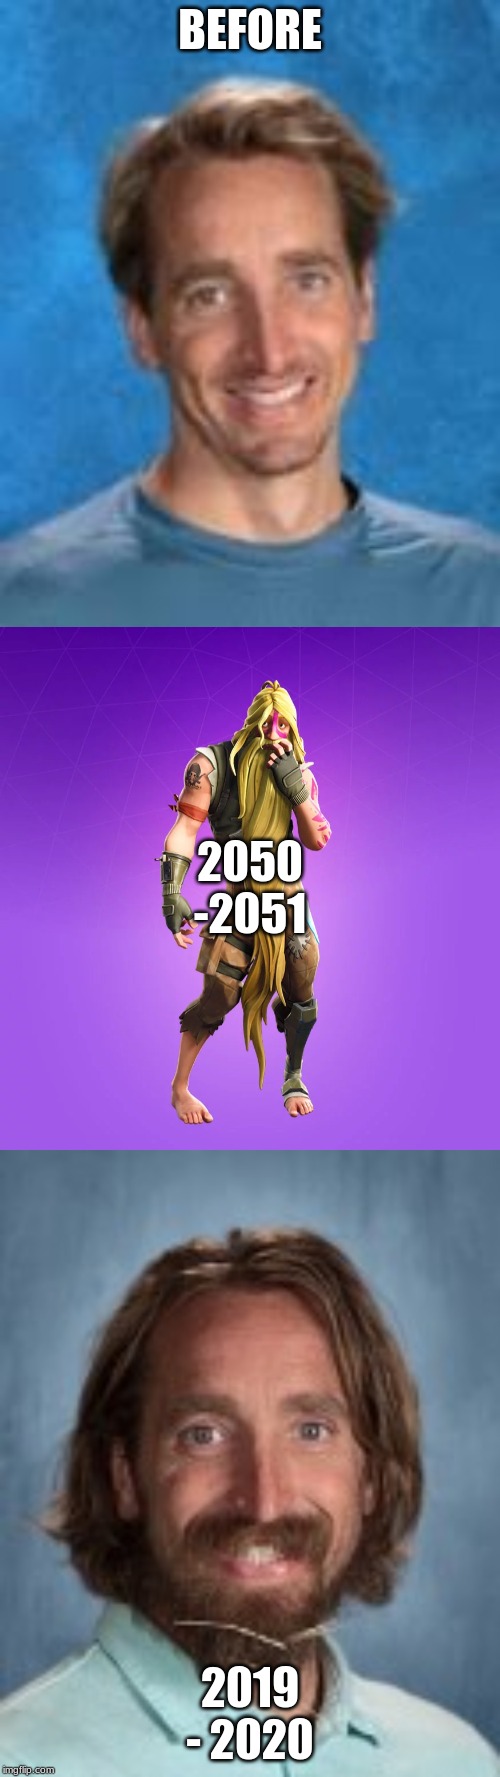 BEFORE; 2050 -2051; 2019 - 2020 | image tagged in mr grabhorn before after now | made w/ Imgflip meme maker